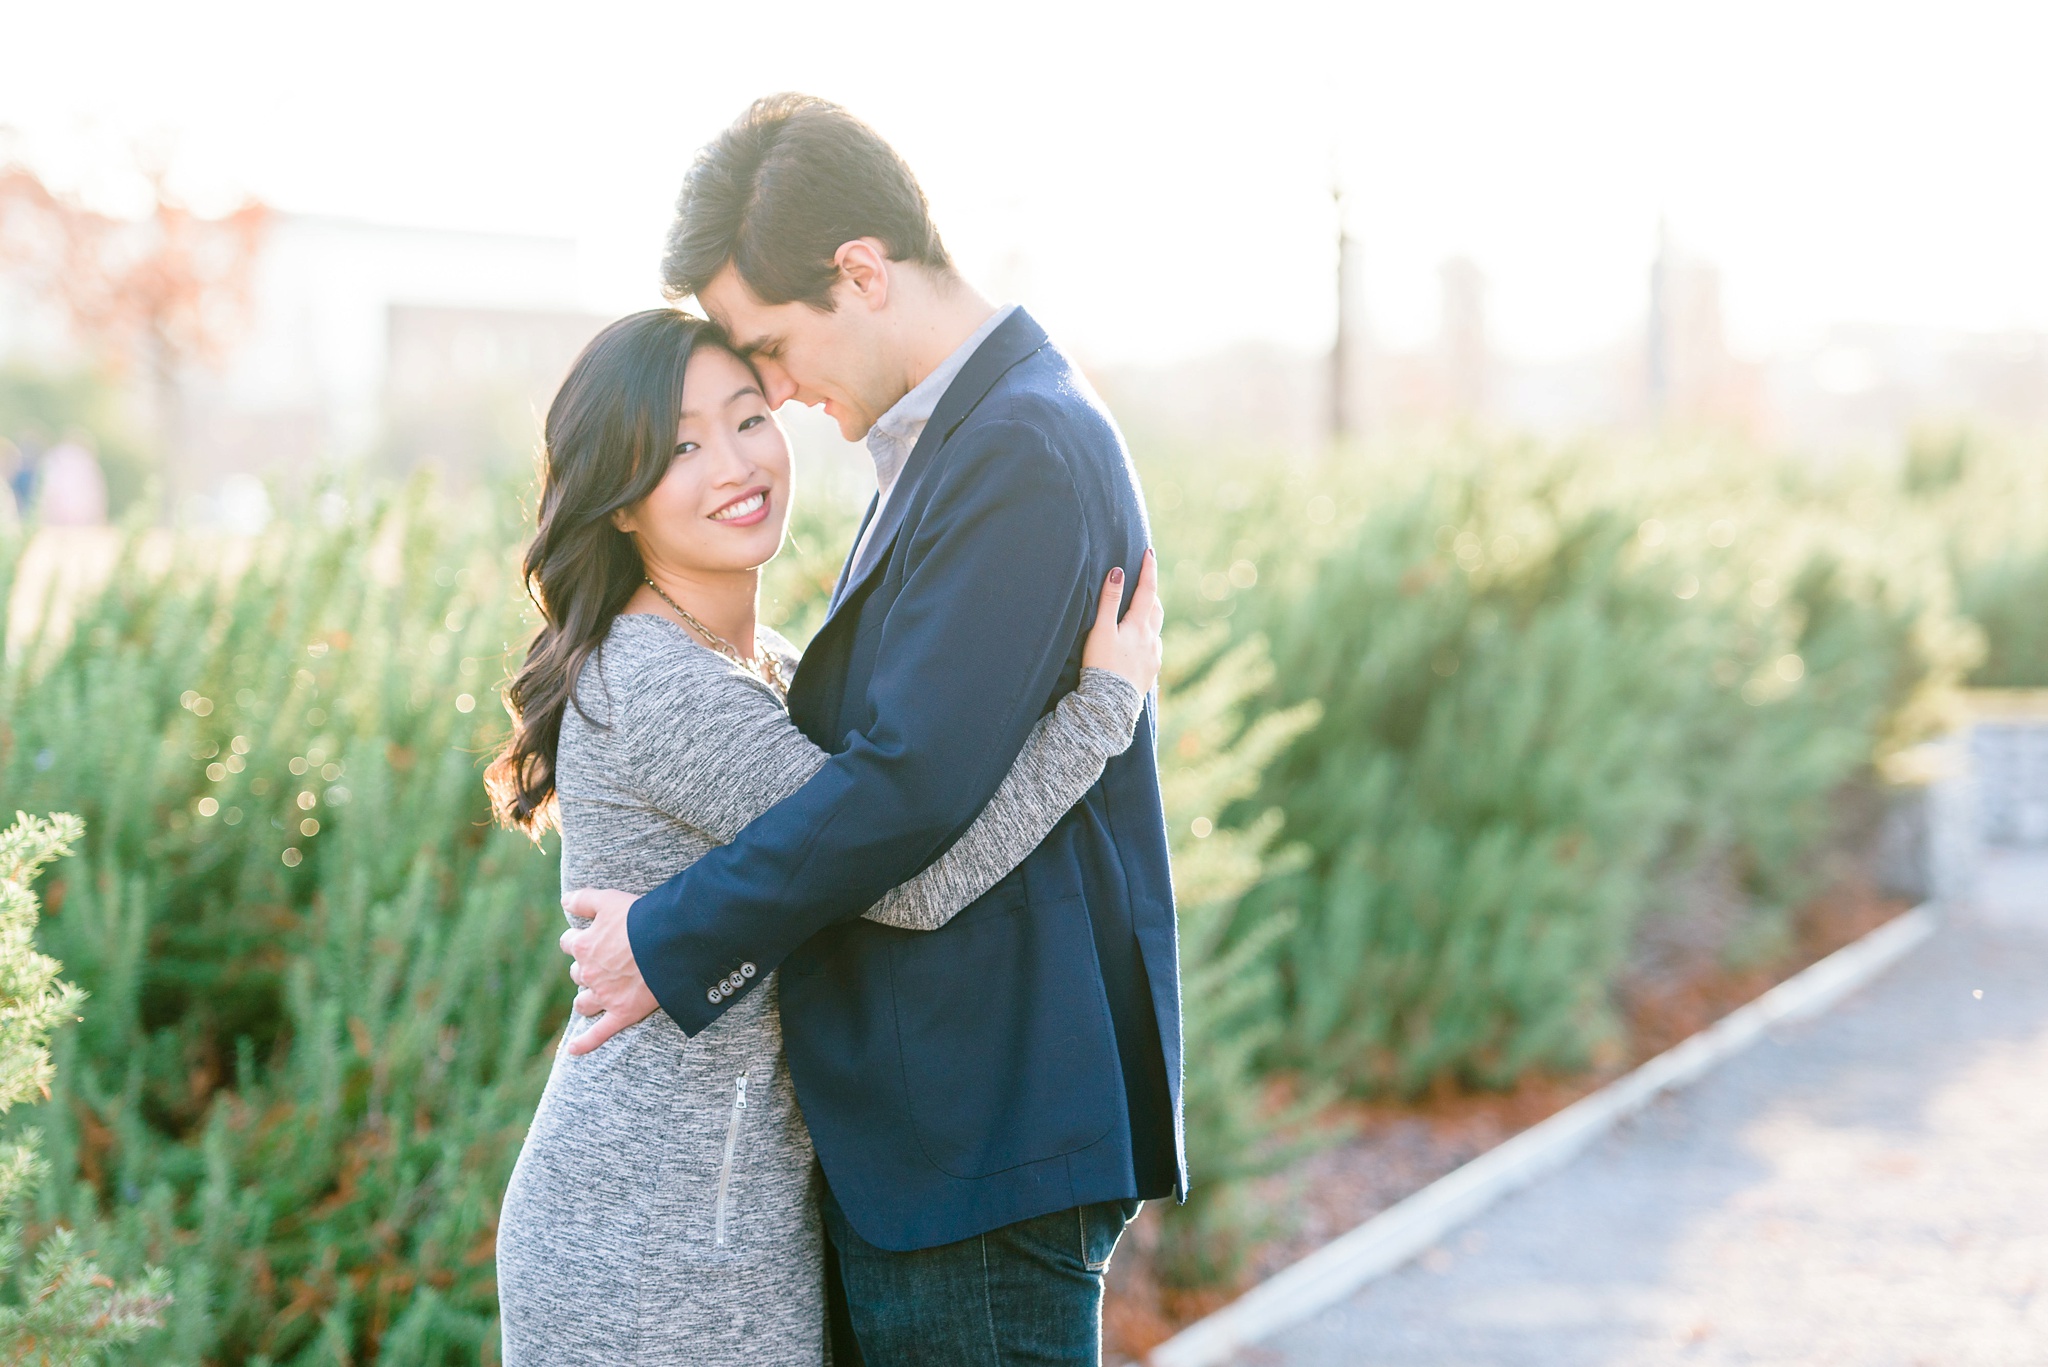 Downtown Nice to Have You in Birmingham Engagement Session| Birmingham Alabama Wedding Photographers_0012.jpg